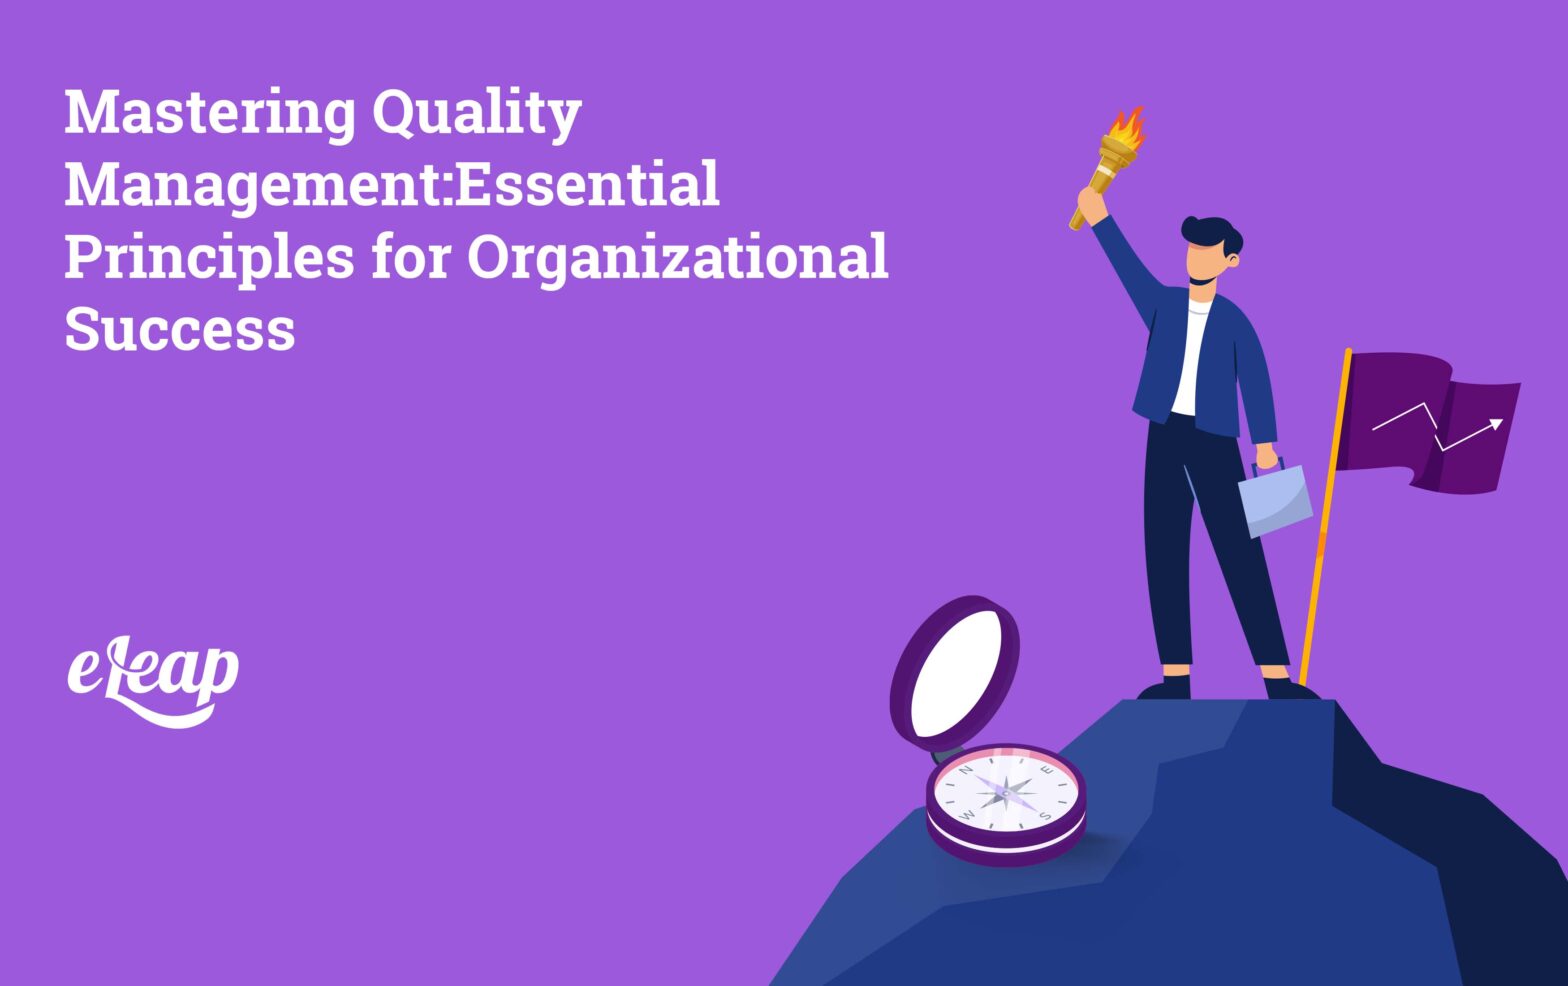 Mastering Quality Management: Essential Principles for Organizational Success